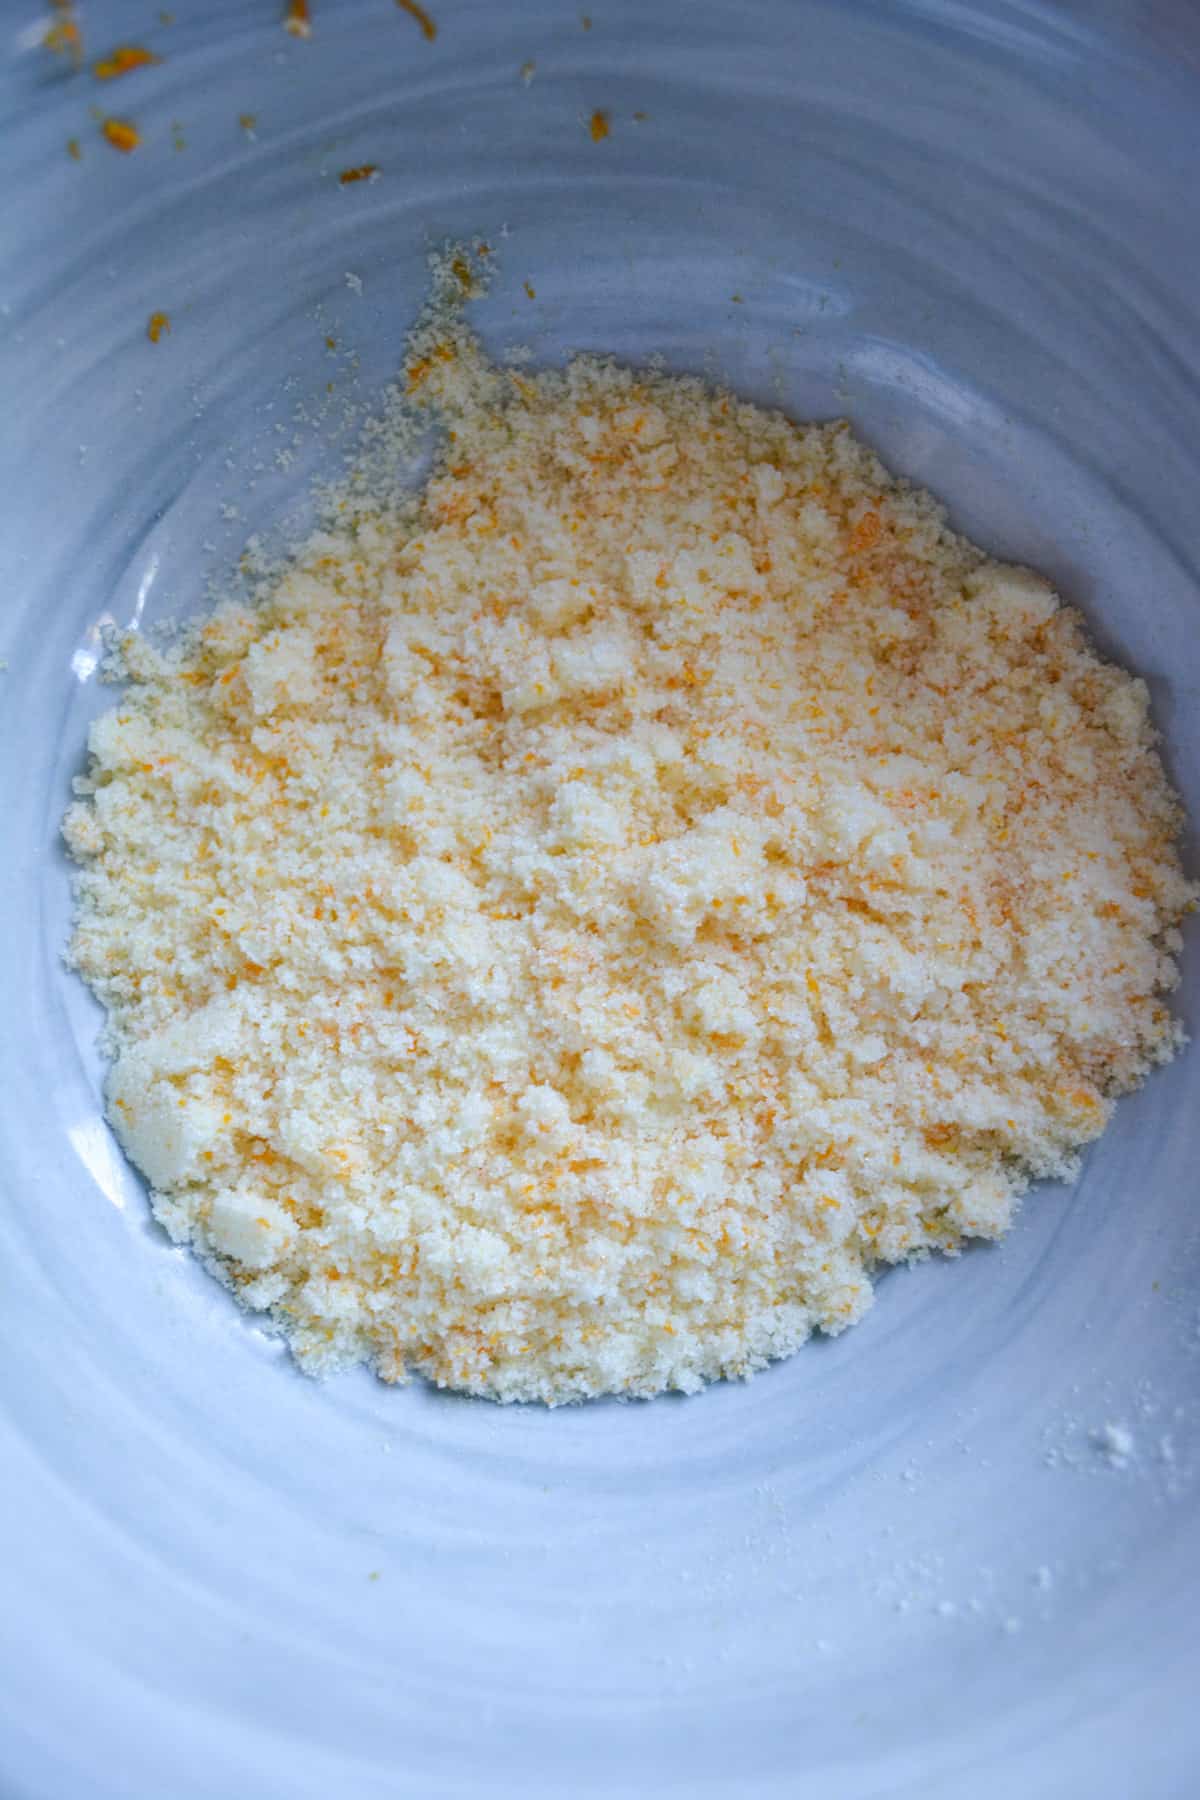 Orange zest rubbed together with granulated sugar in a marble bowl.